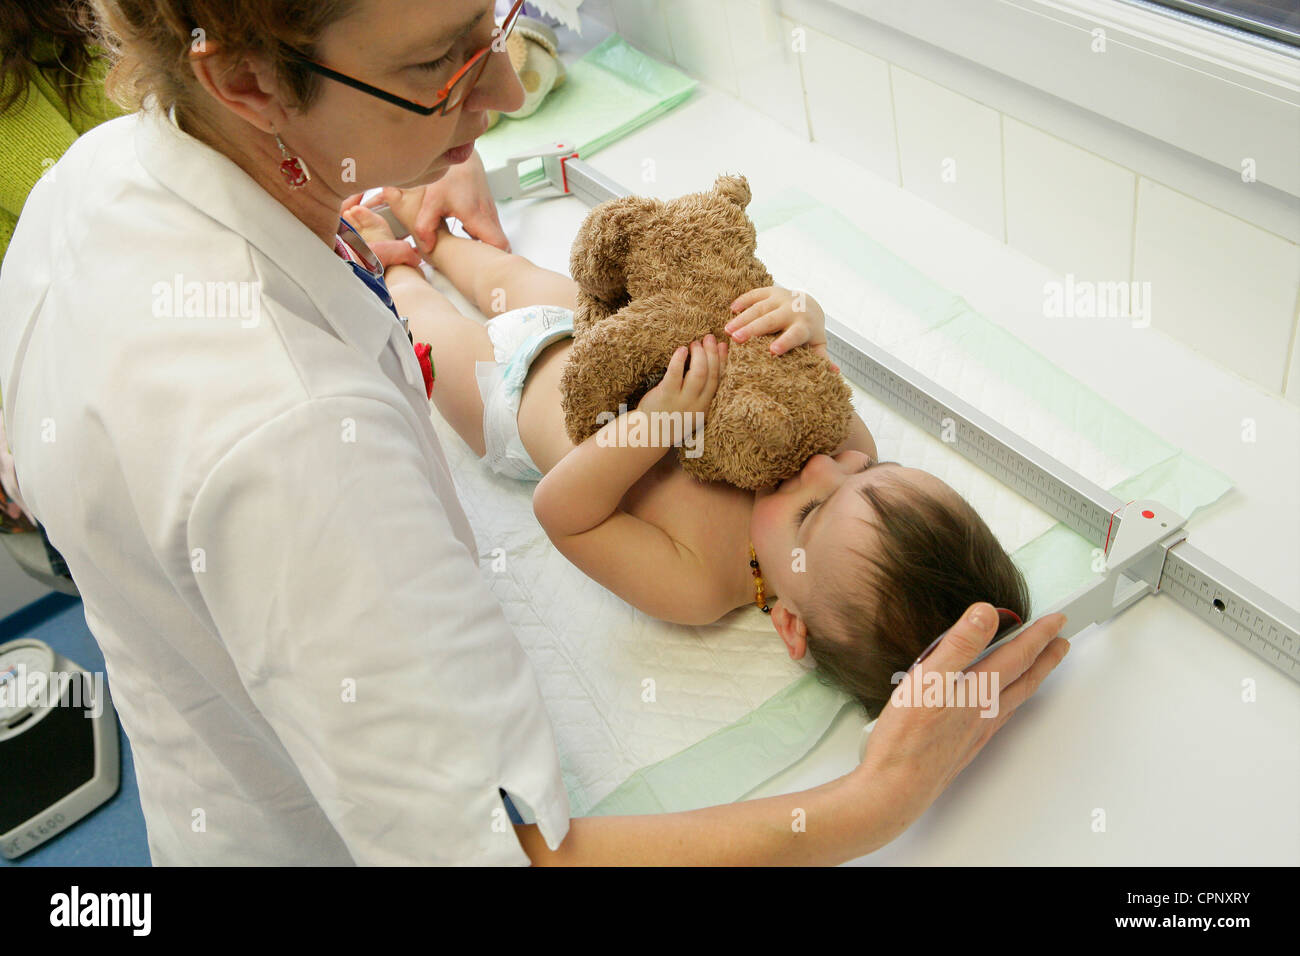 https://c8.alamy.com/comp/CPNXRY/measuring-height-in-a-child-CPNXRY.jpg